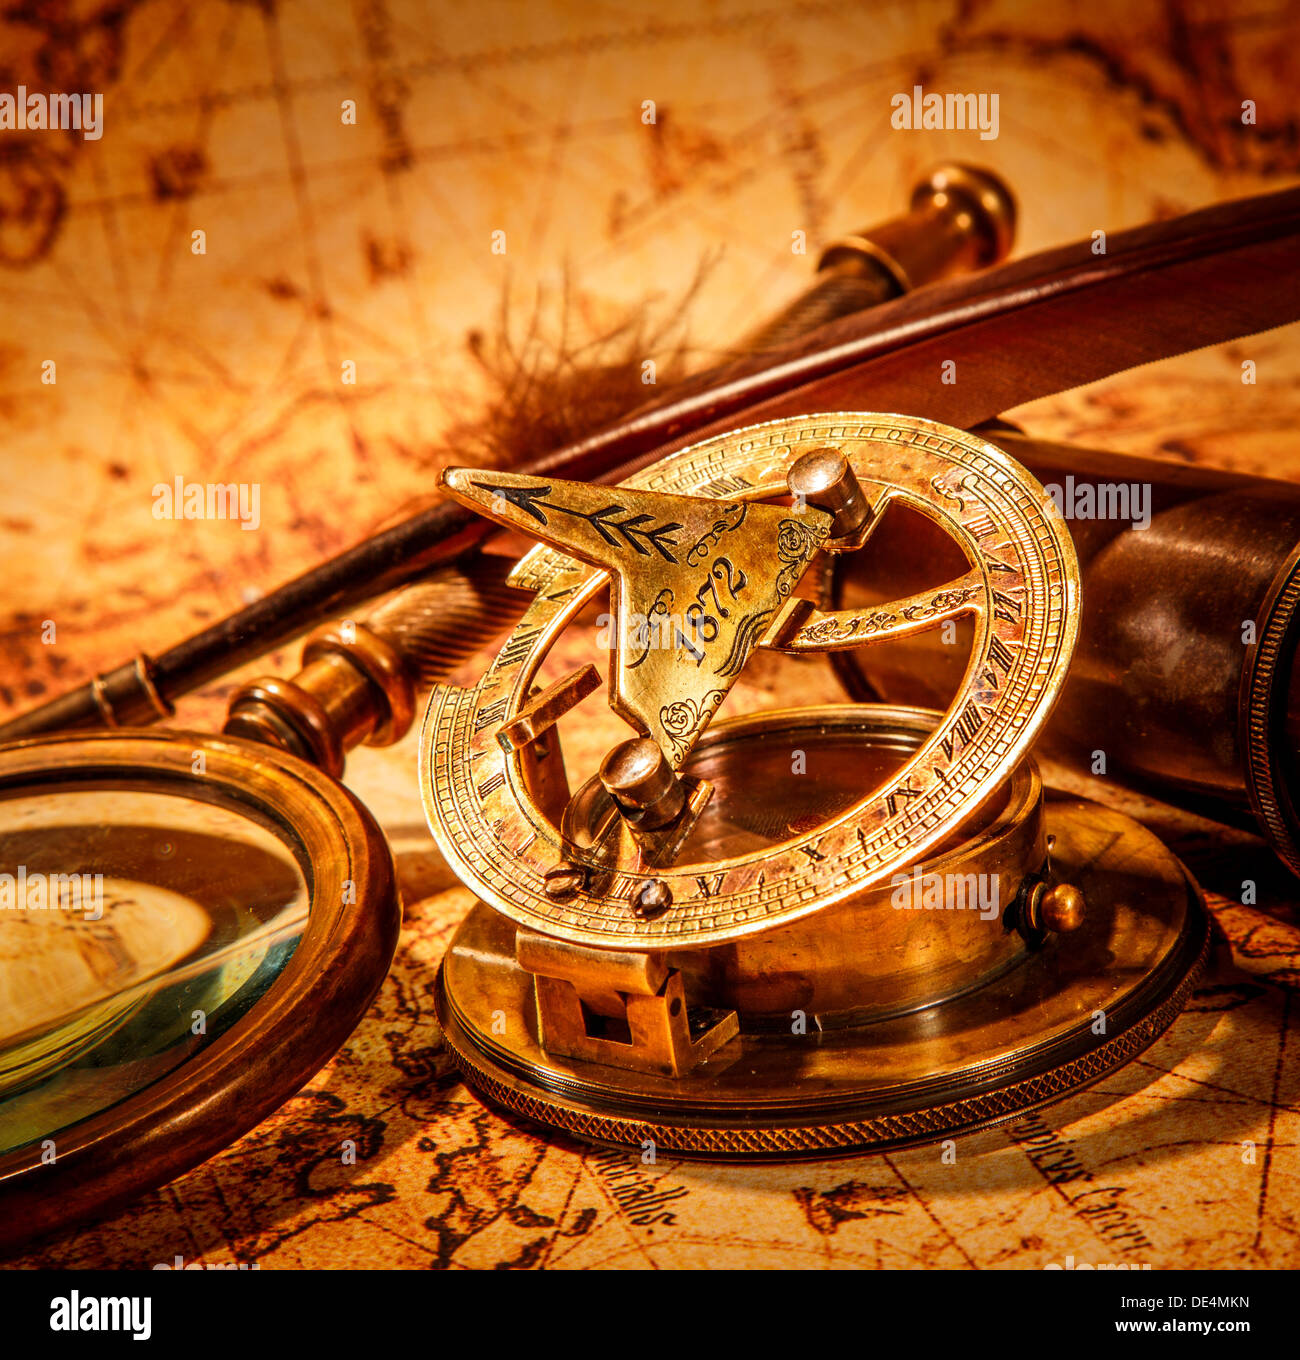 Vintage compass, goose quill pen, spyglass and a pocket watch lying on an old map. Stock Photo